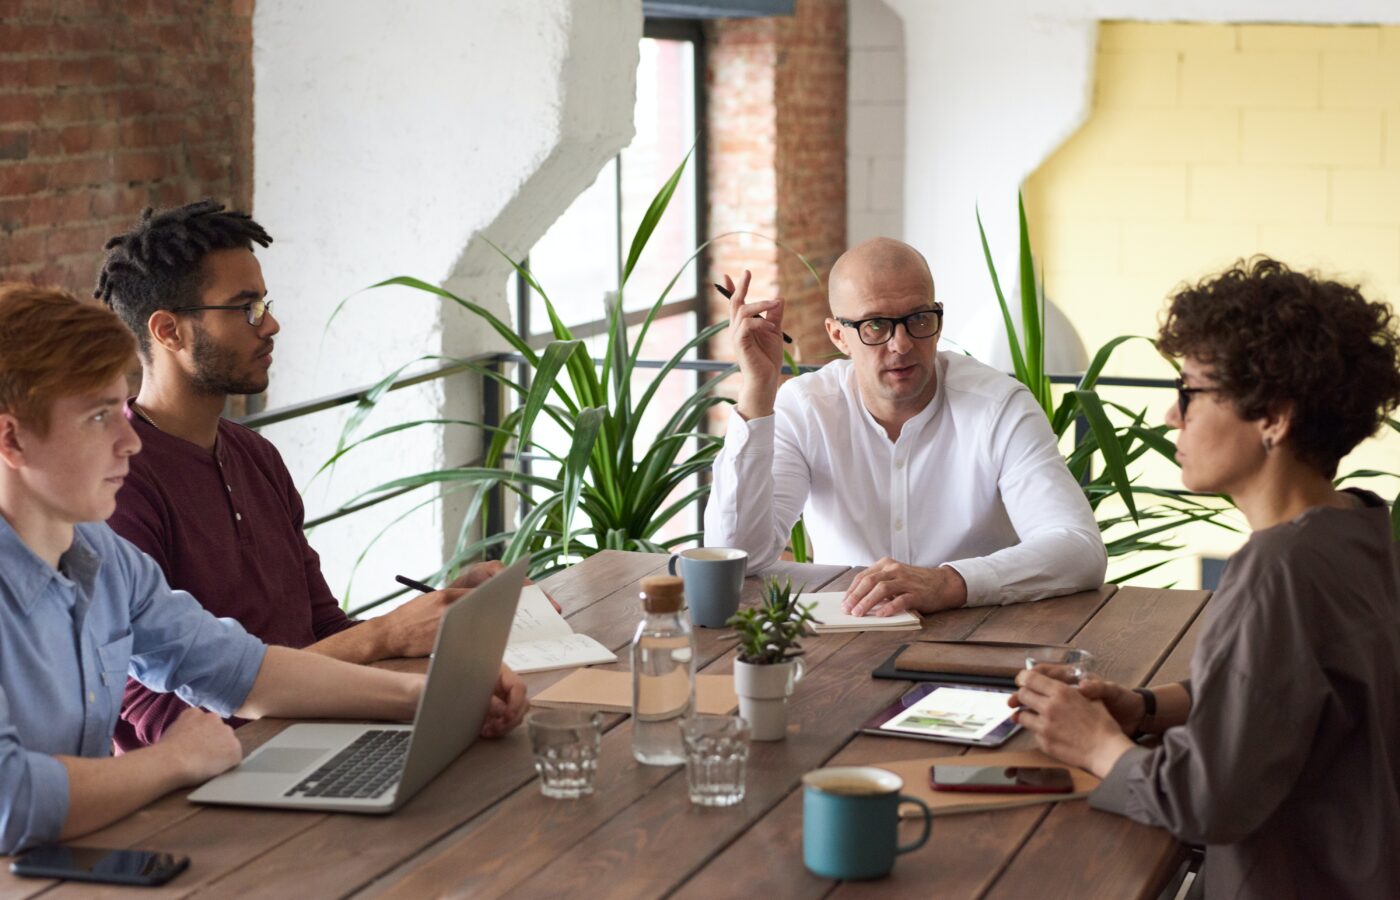 E-commerce due diligence - 4 people sitting at a large wooden table holding a business meeting